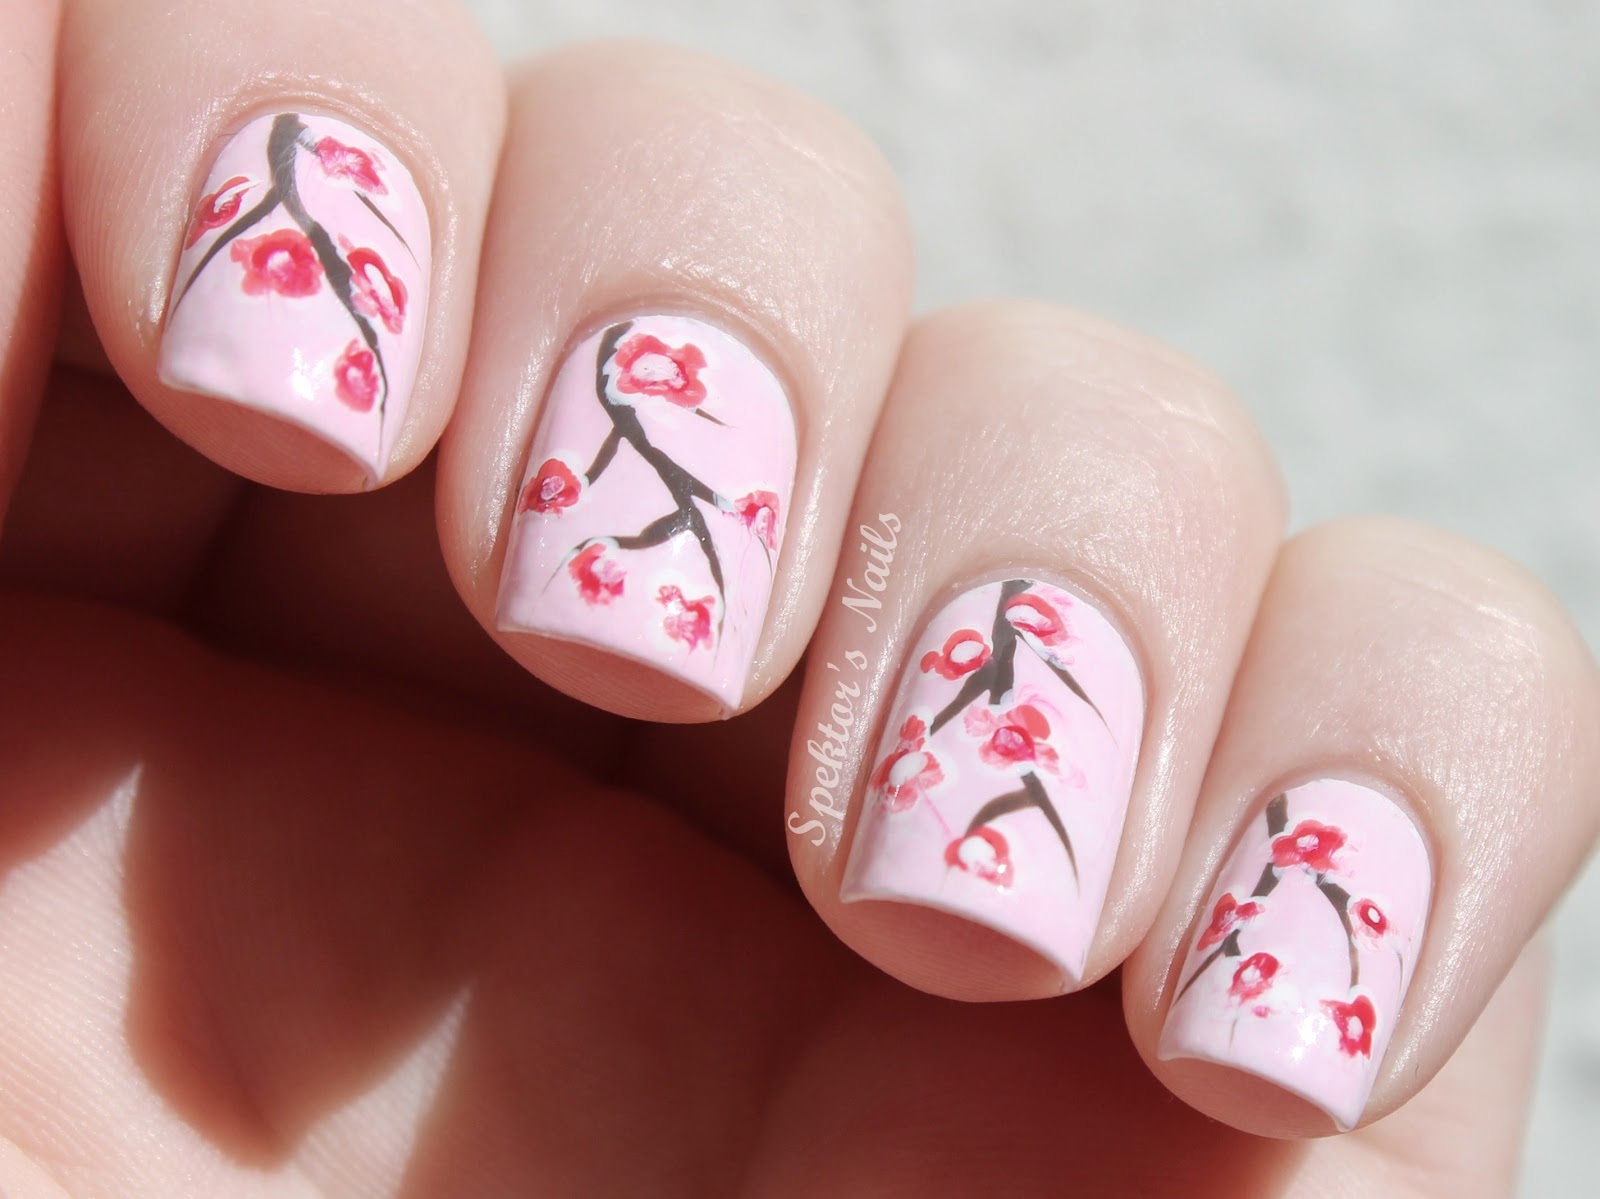 Cherry Blossom Nail Art Tutorial in Arbroath - wide 9